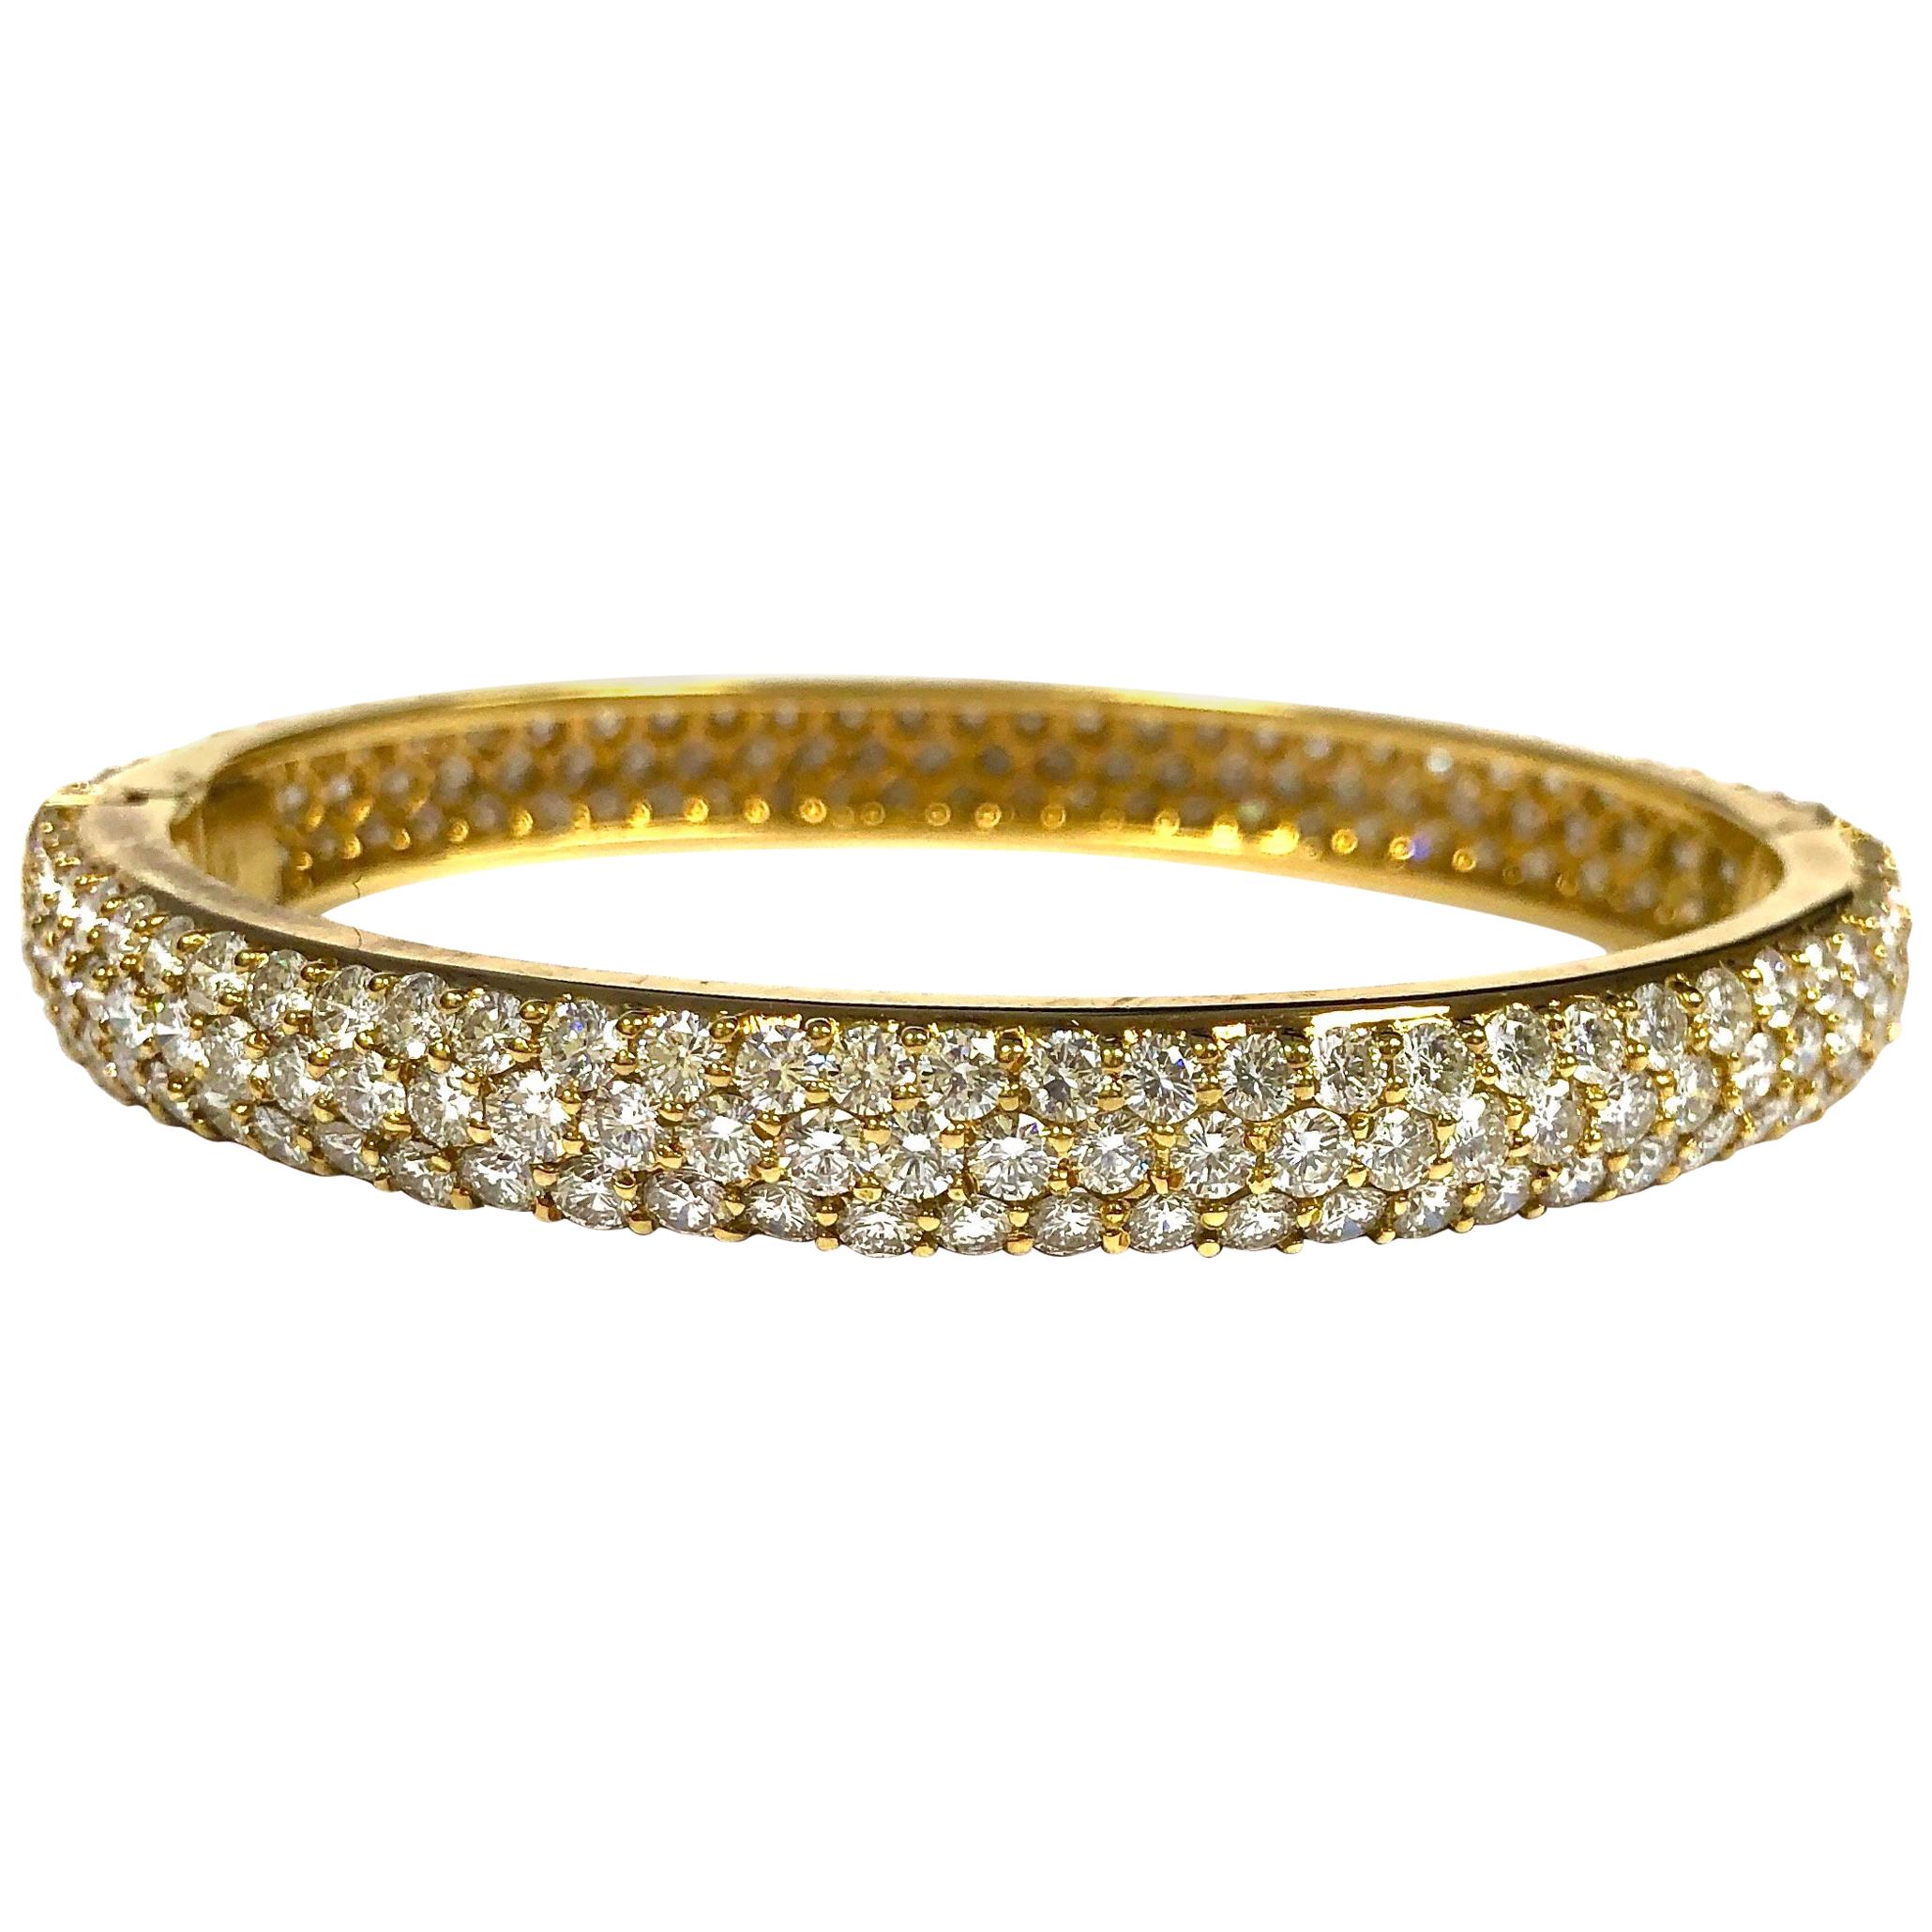 Magnificent diamond set hinged bangle bracelet by jewelry house of Hammerman Brothers. Pure perfection. Crafted in 18K yellow gold, bead set with 204 round brilliant cut diamonds. Total weight: 14.0 carats. Color: F-G, Clarity: